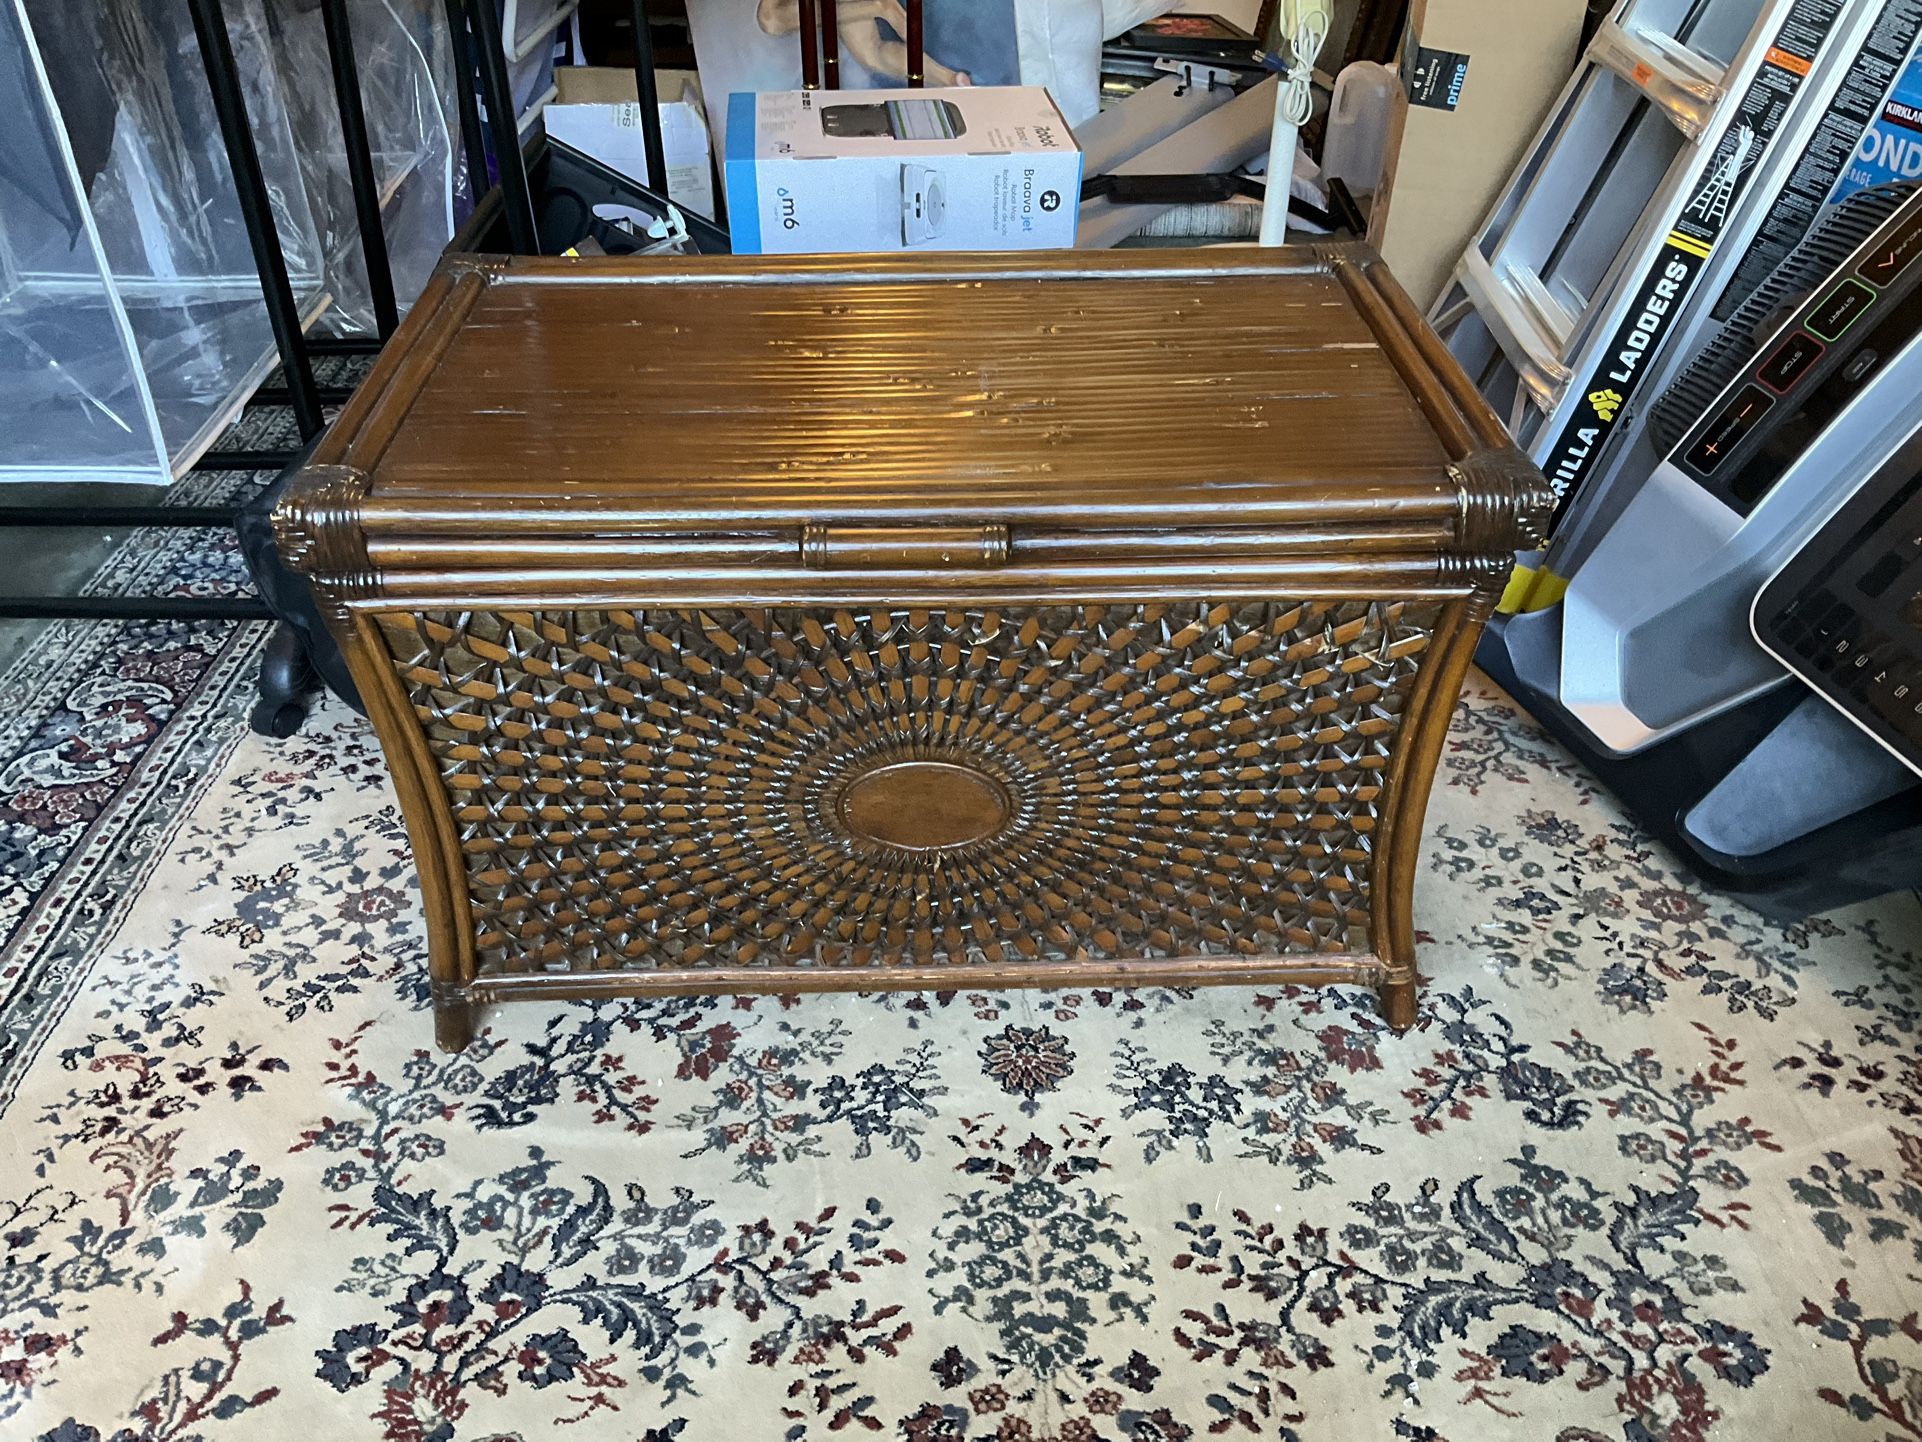 Rattan Coffee Table With Storage